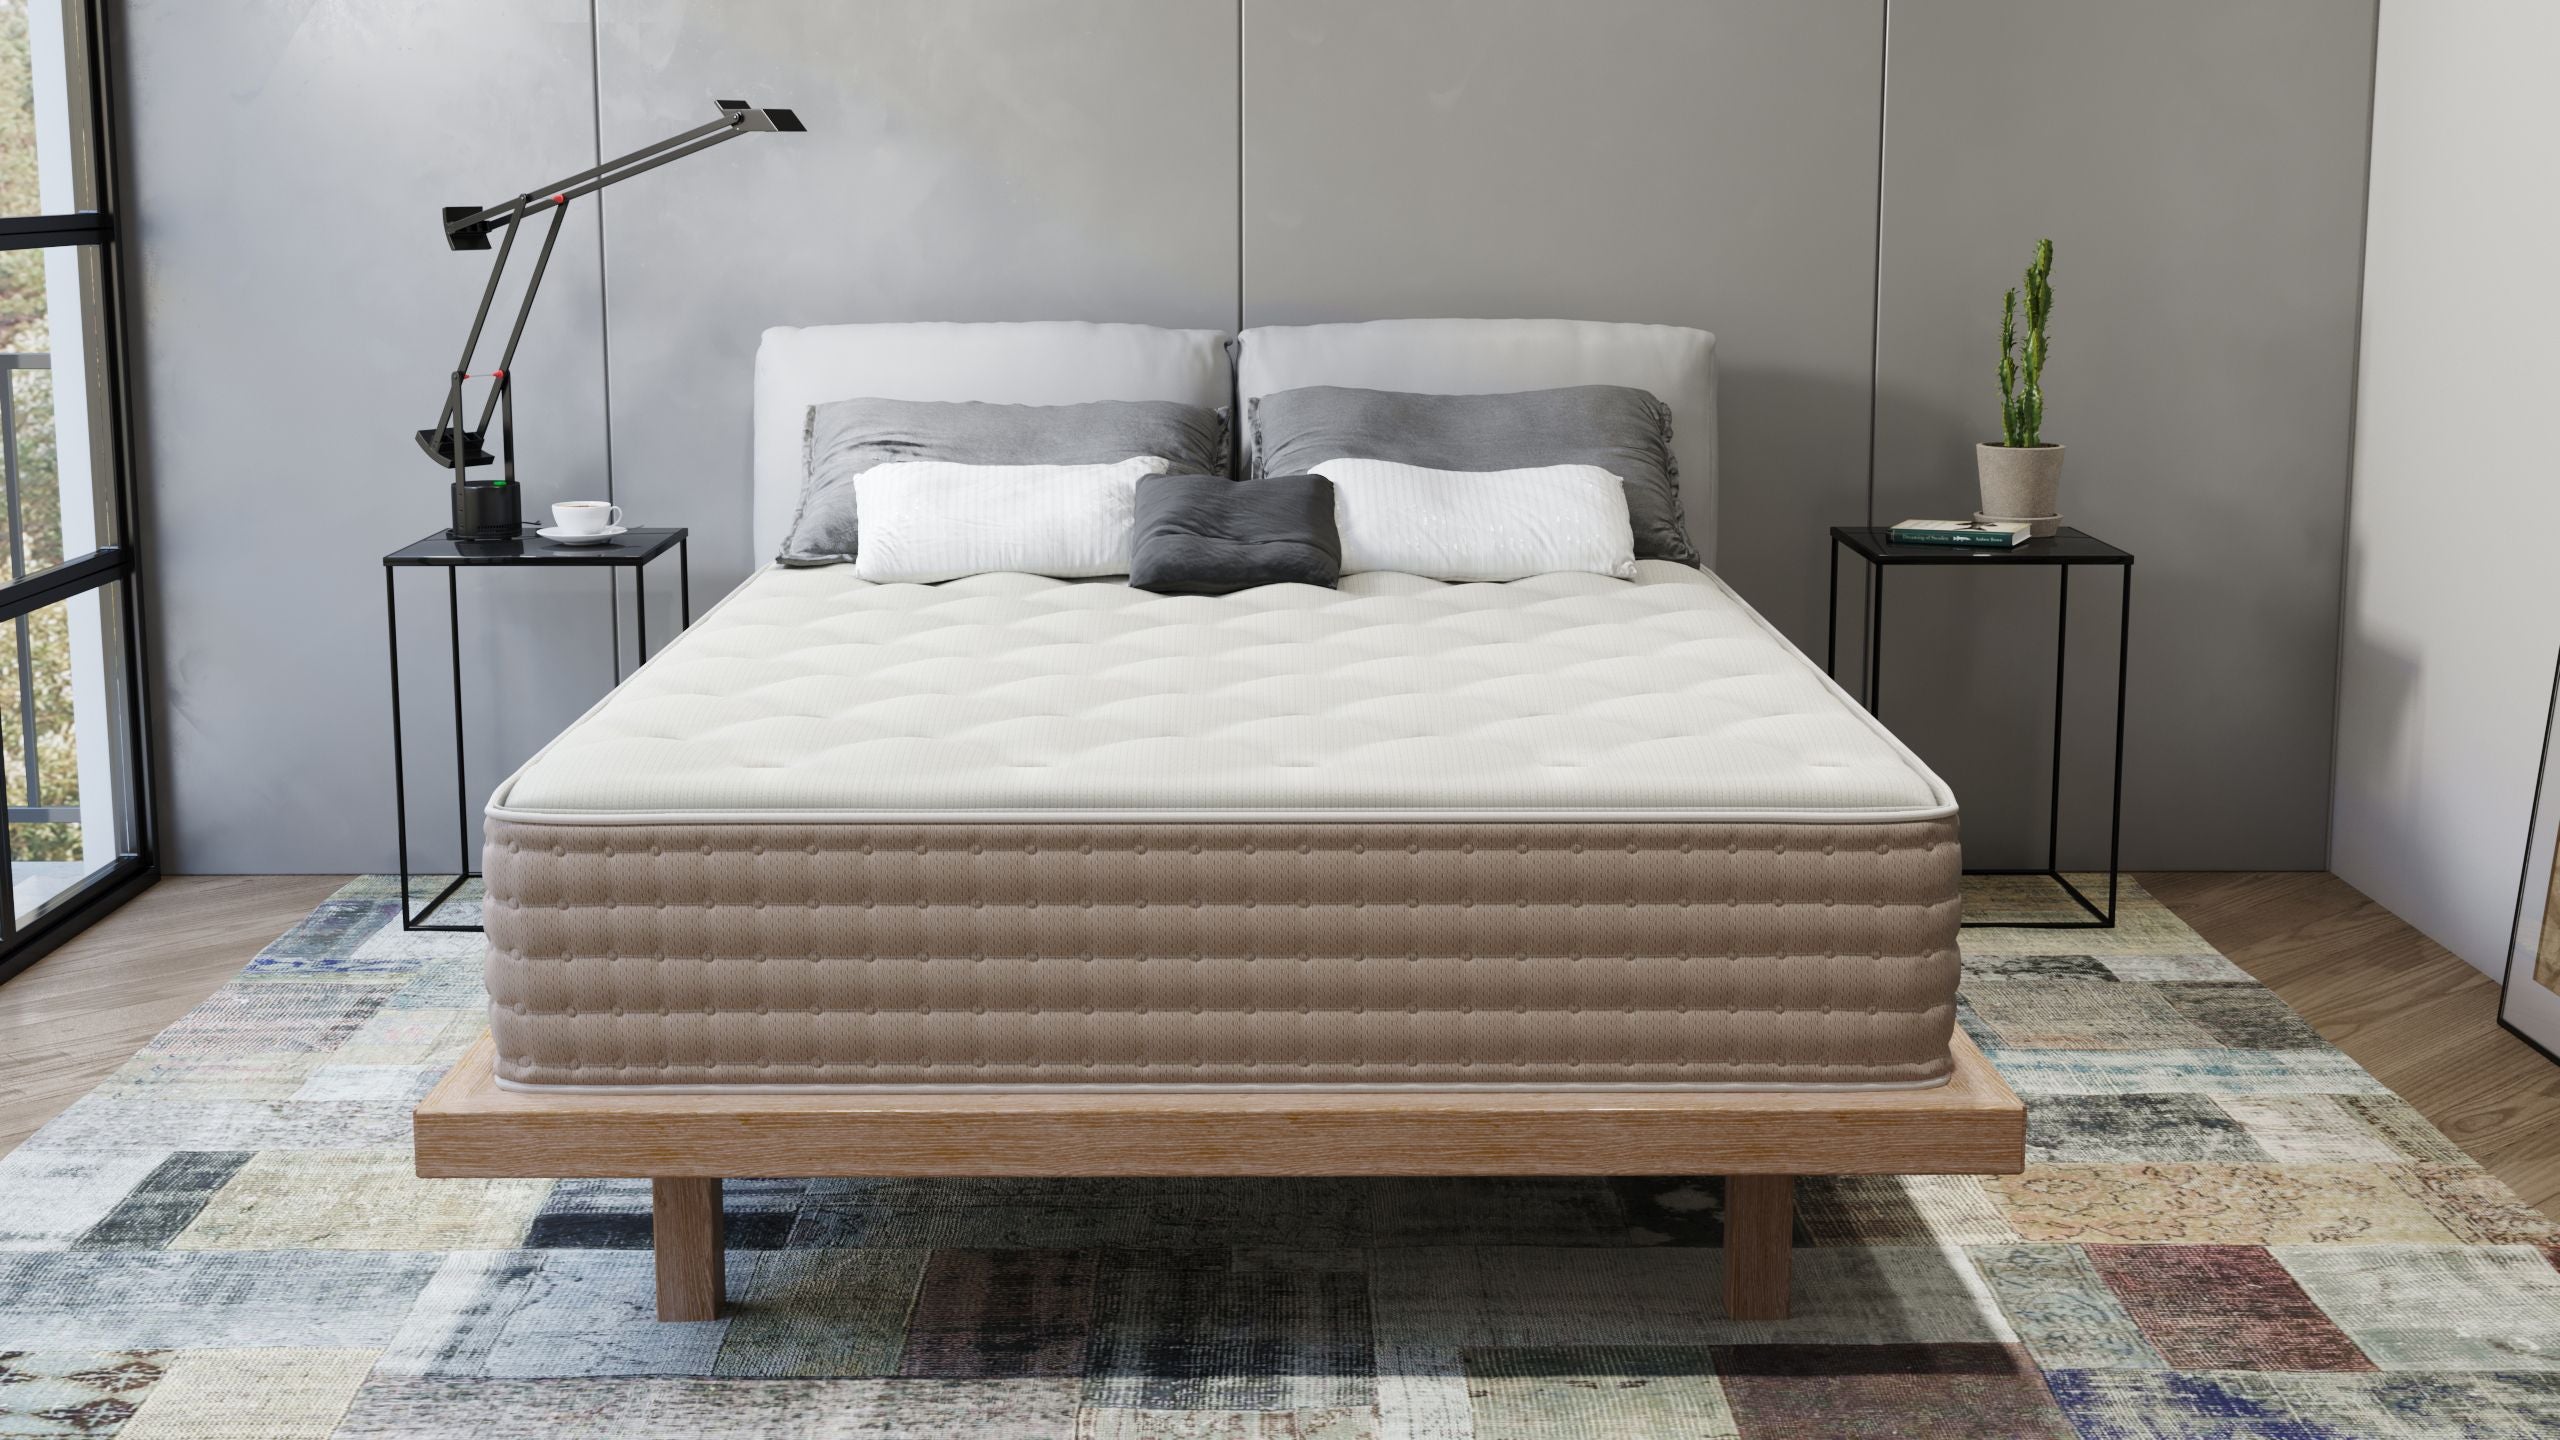 What is the Best Mattress for an Airbnb?